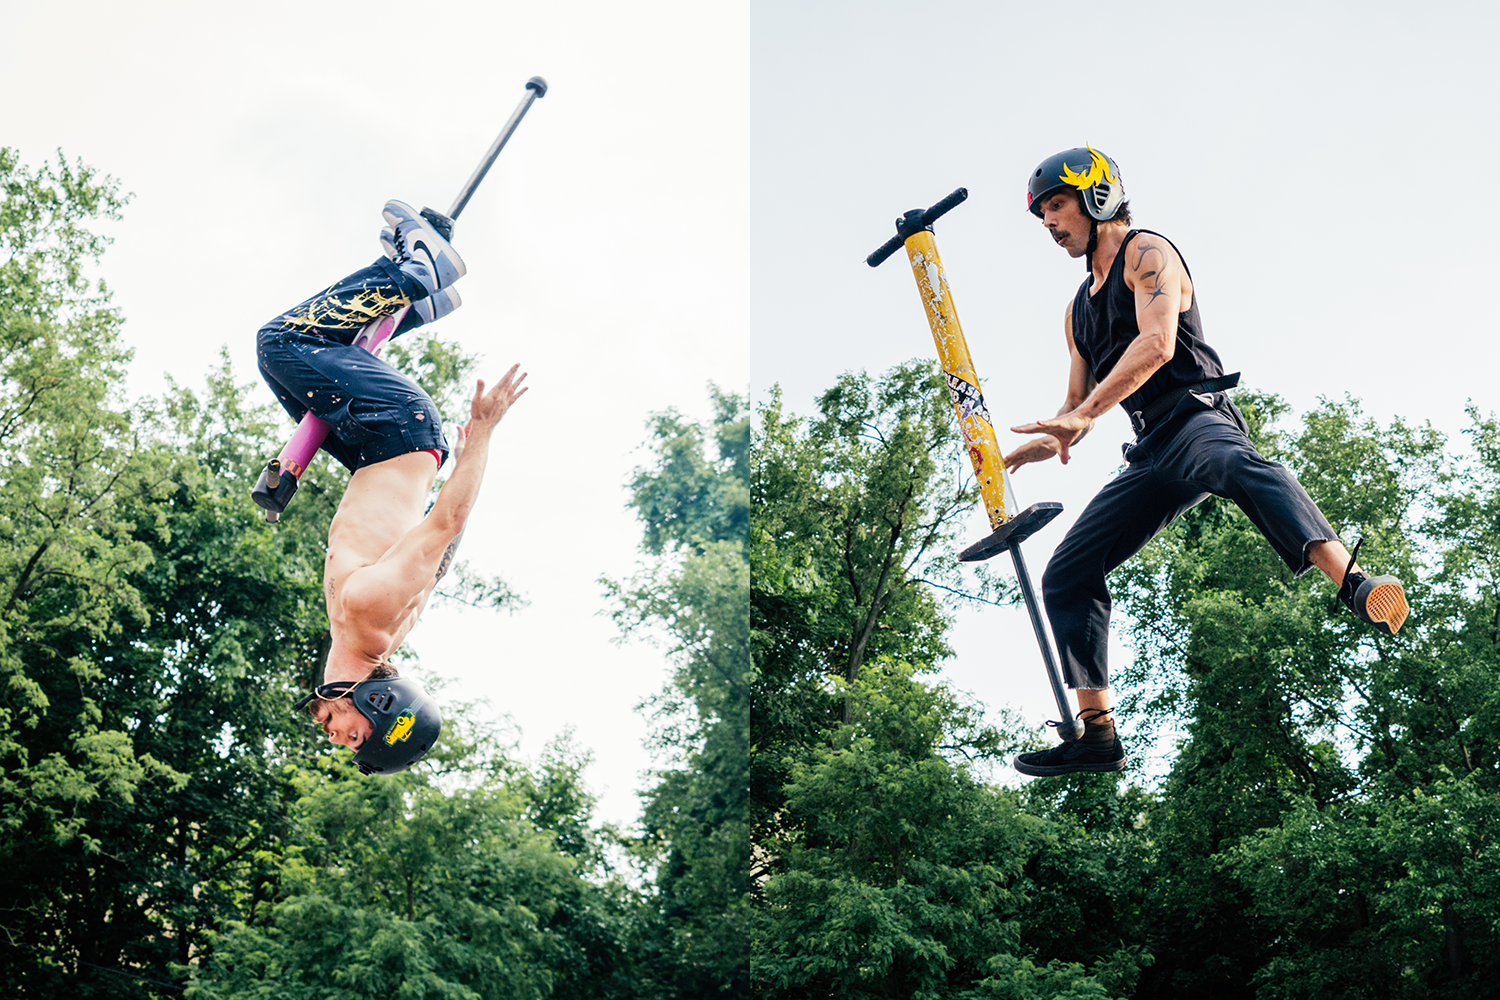 Phillips and Smith do extreme pogo jumps